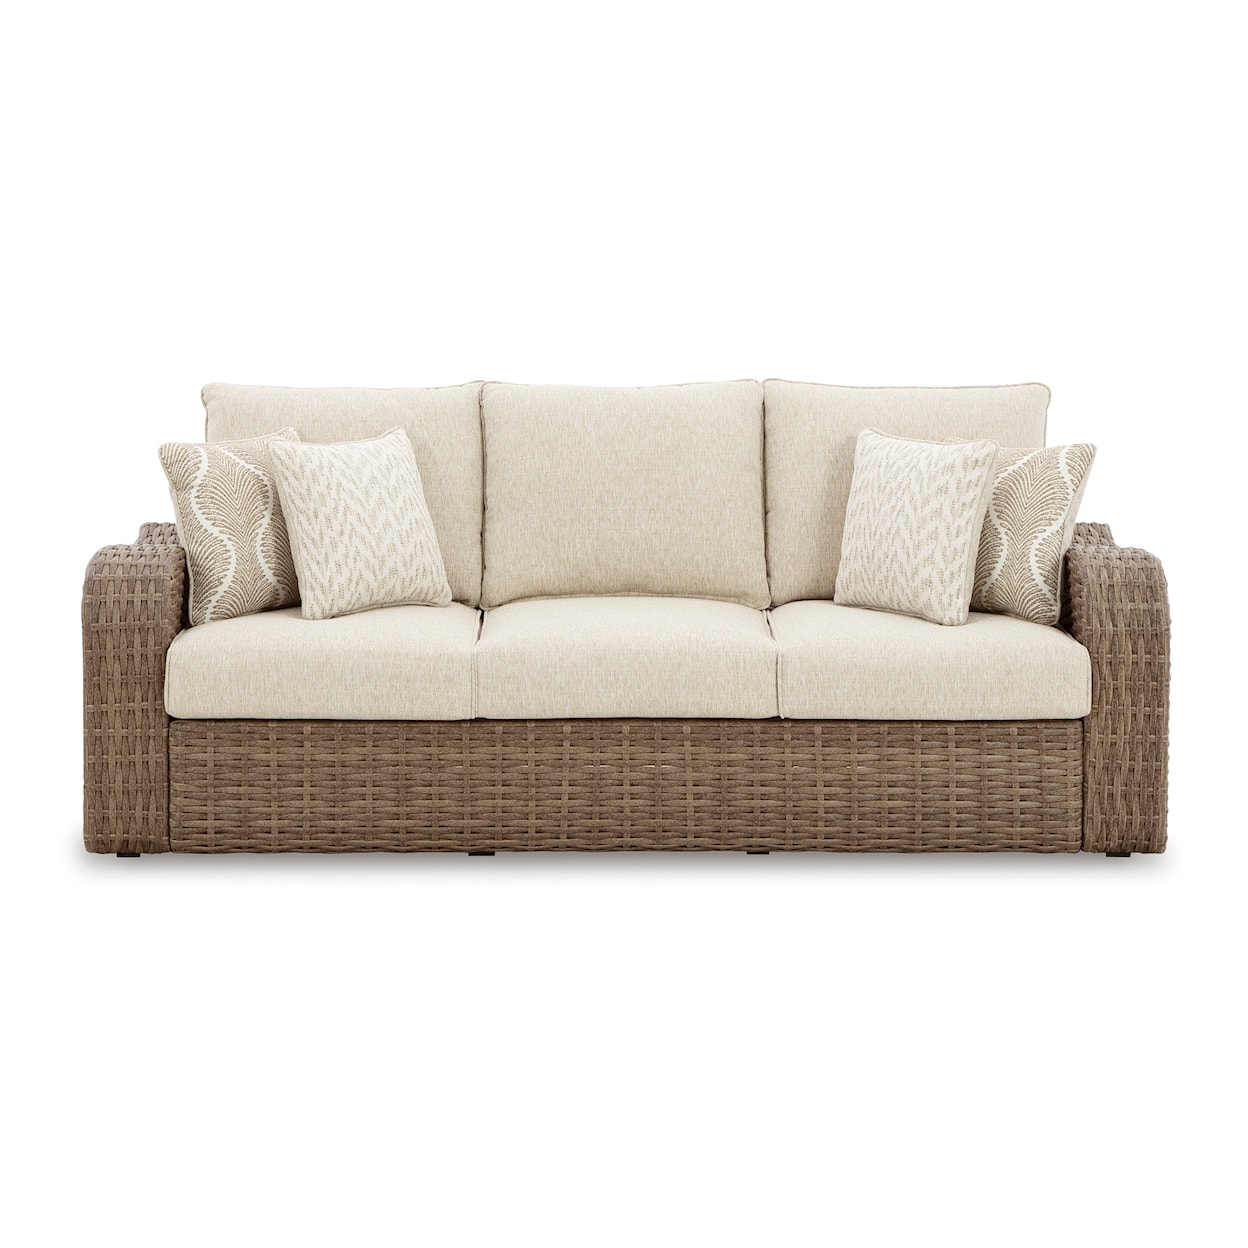 Benchcraft Sandy Bloom Outdoor Sofa with Cushion